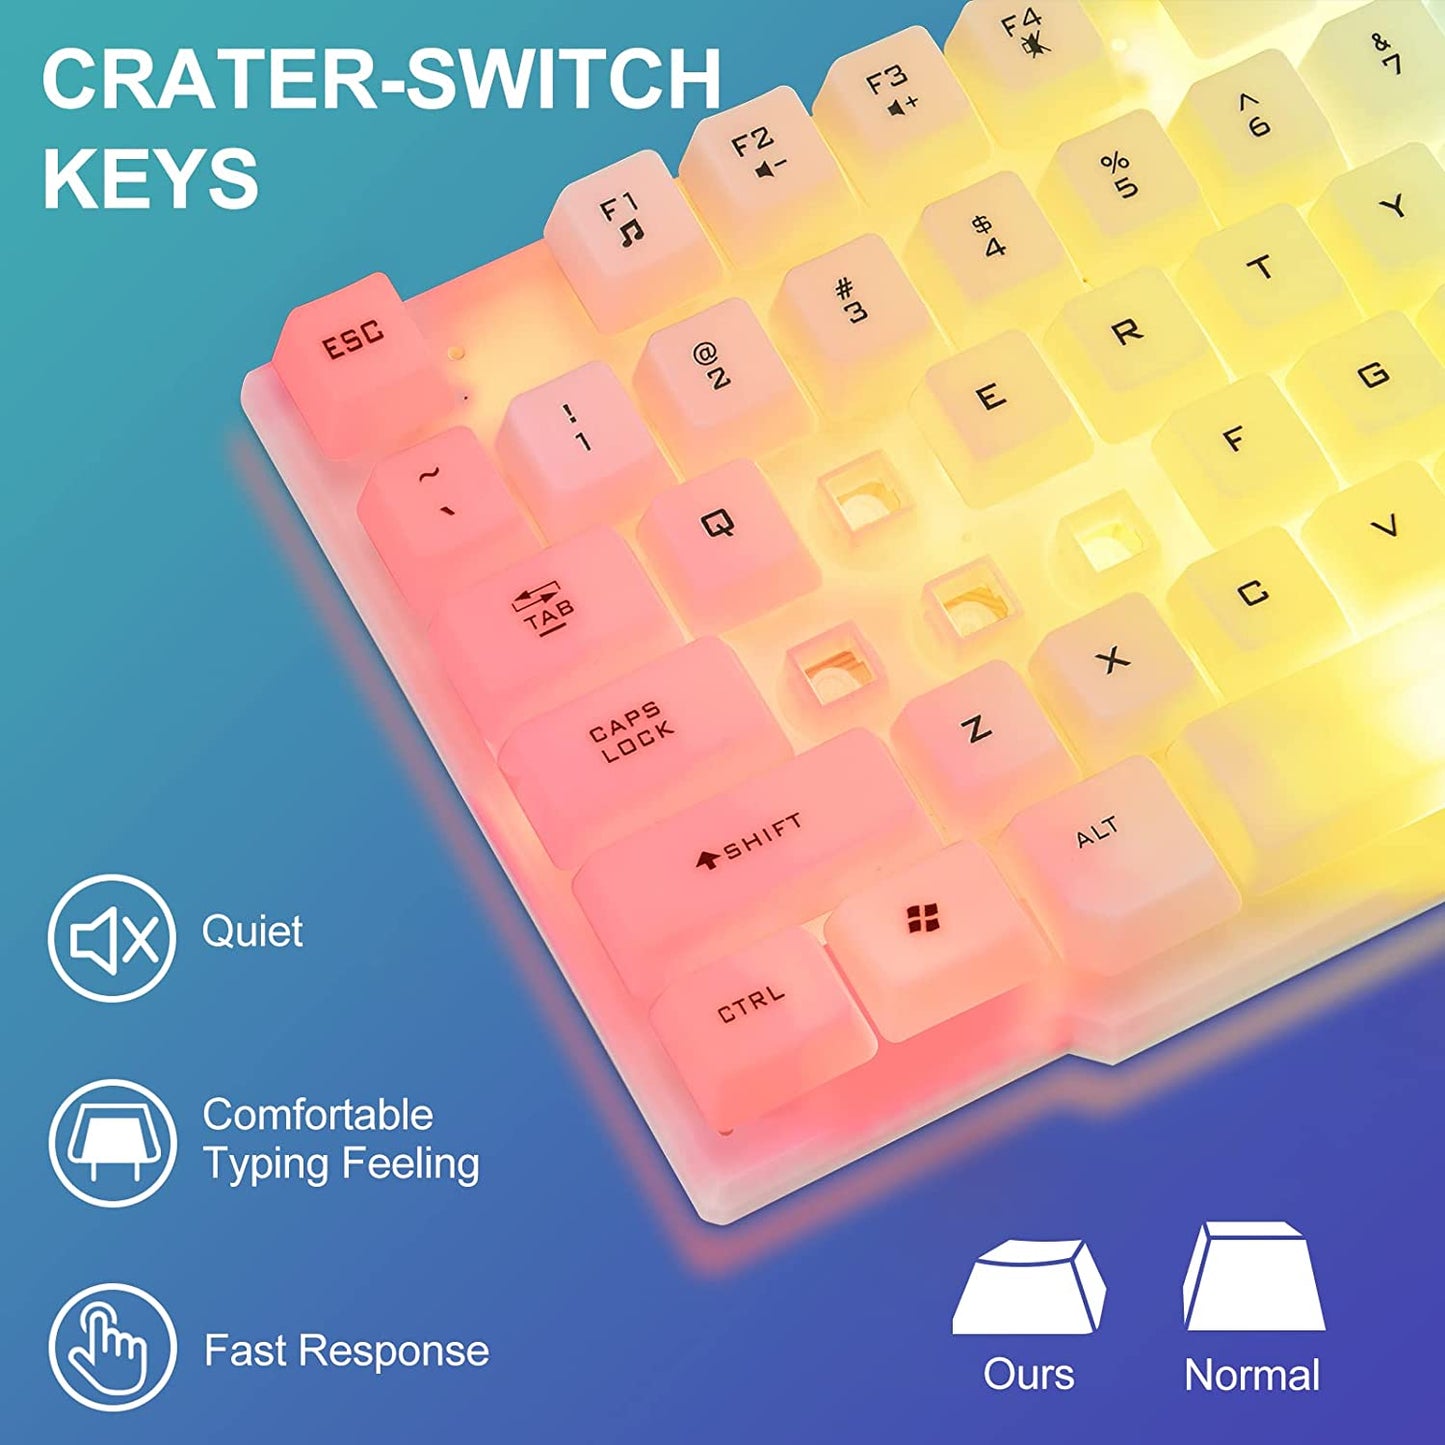 CHONCHOW LED Keyboard and Mouse Combo